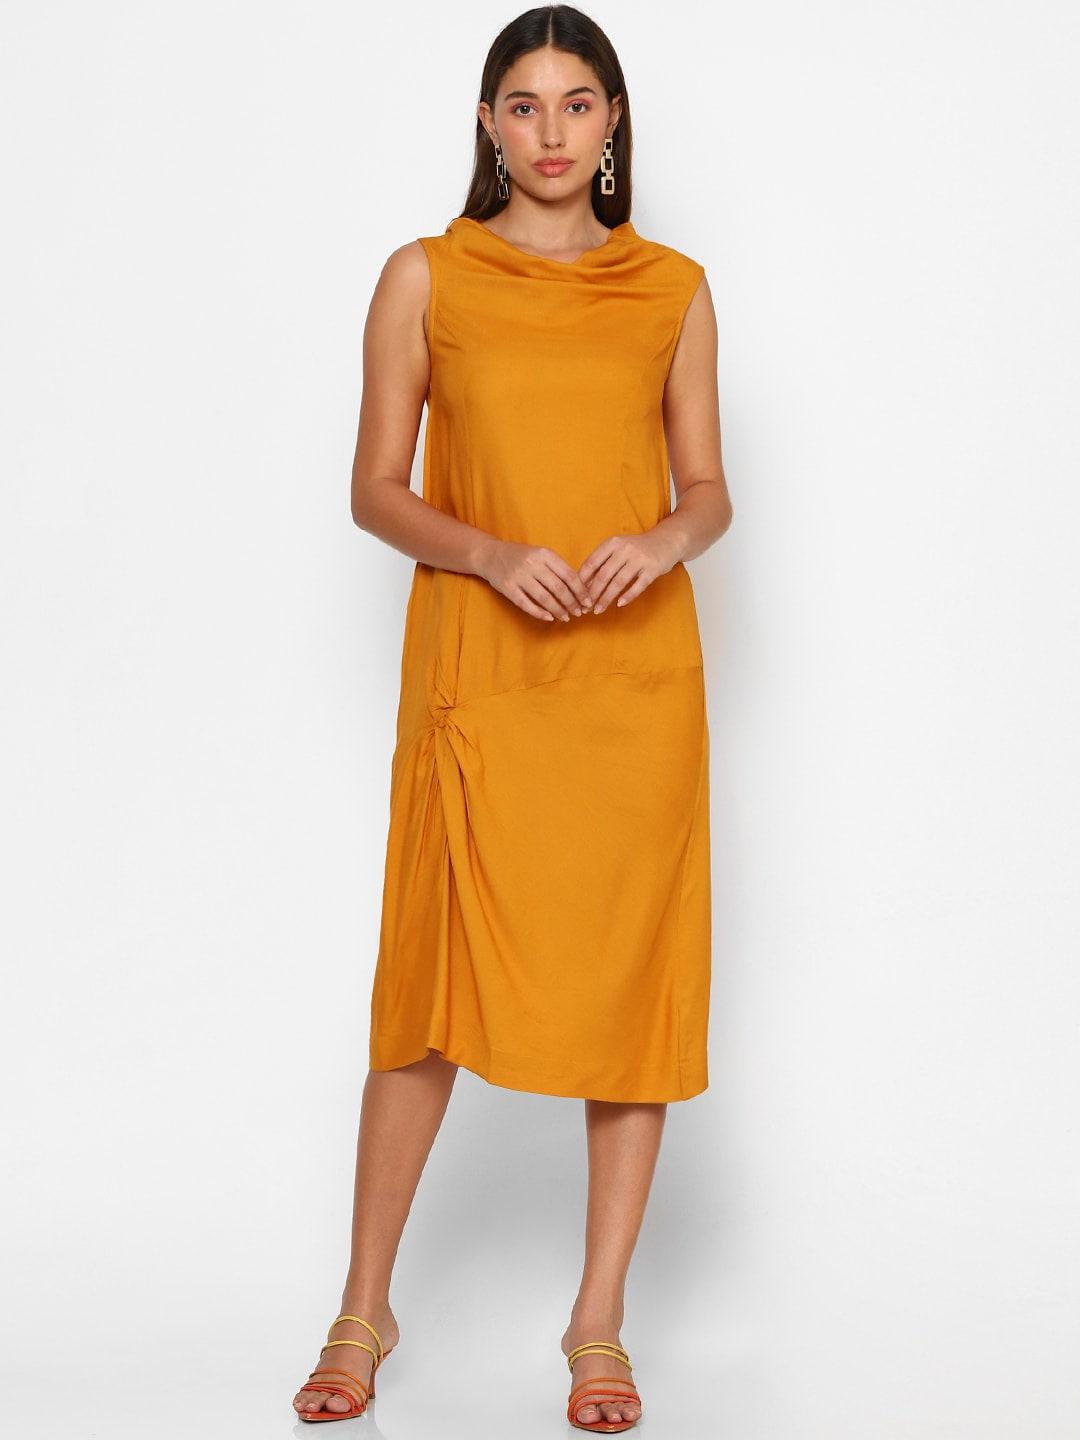 FOREVER 21 Yellow A-Line Midi Dress